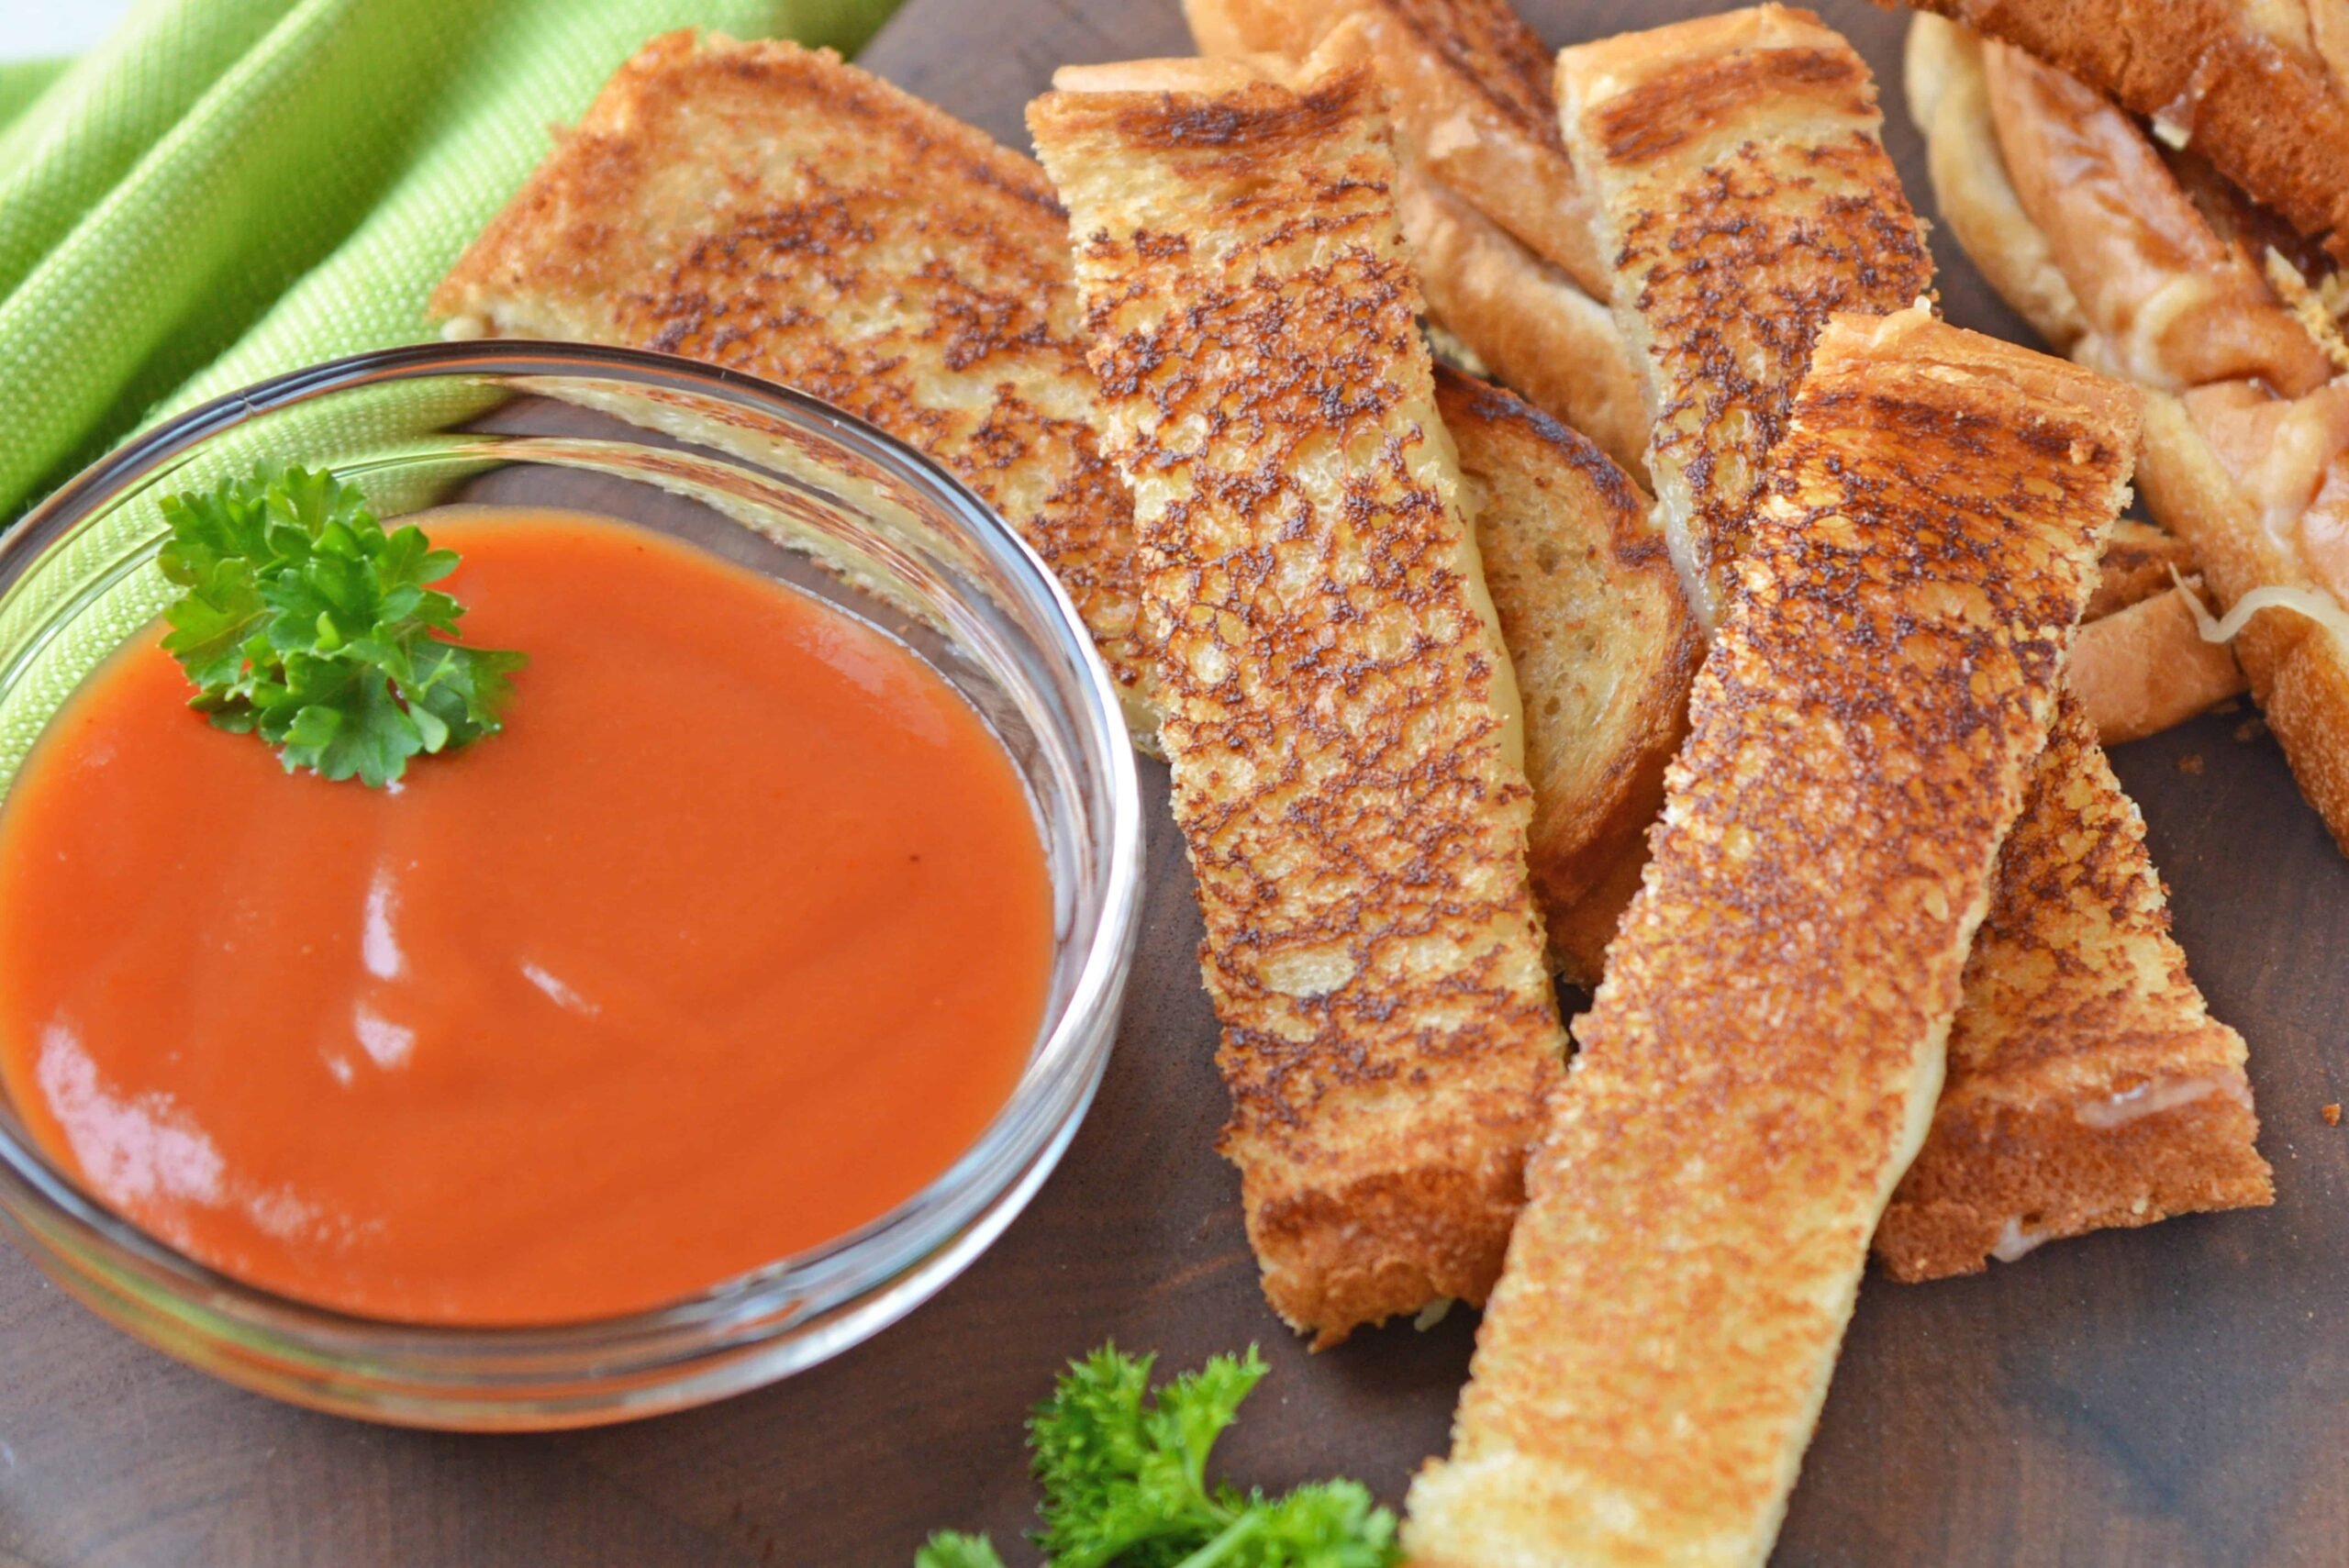 Grilled Cheese Sticks - Three Cheeses with Tomato Jam